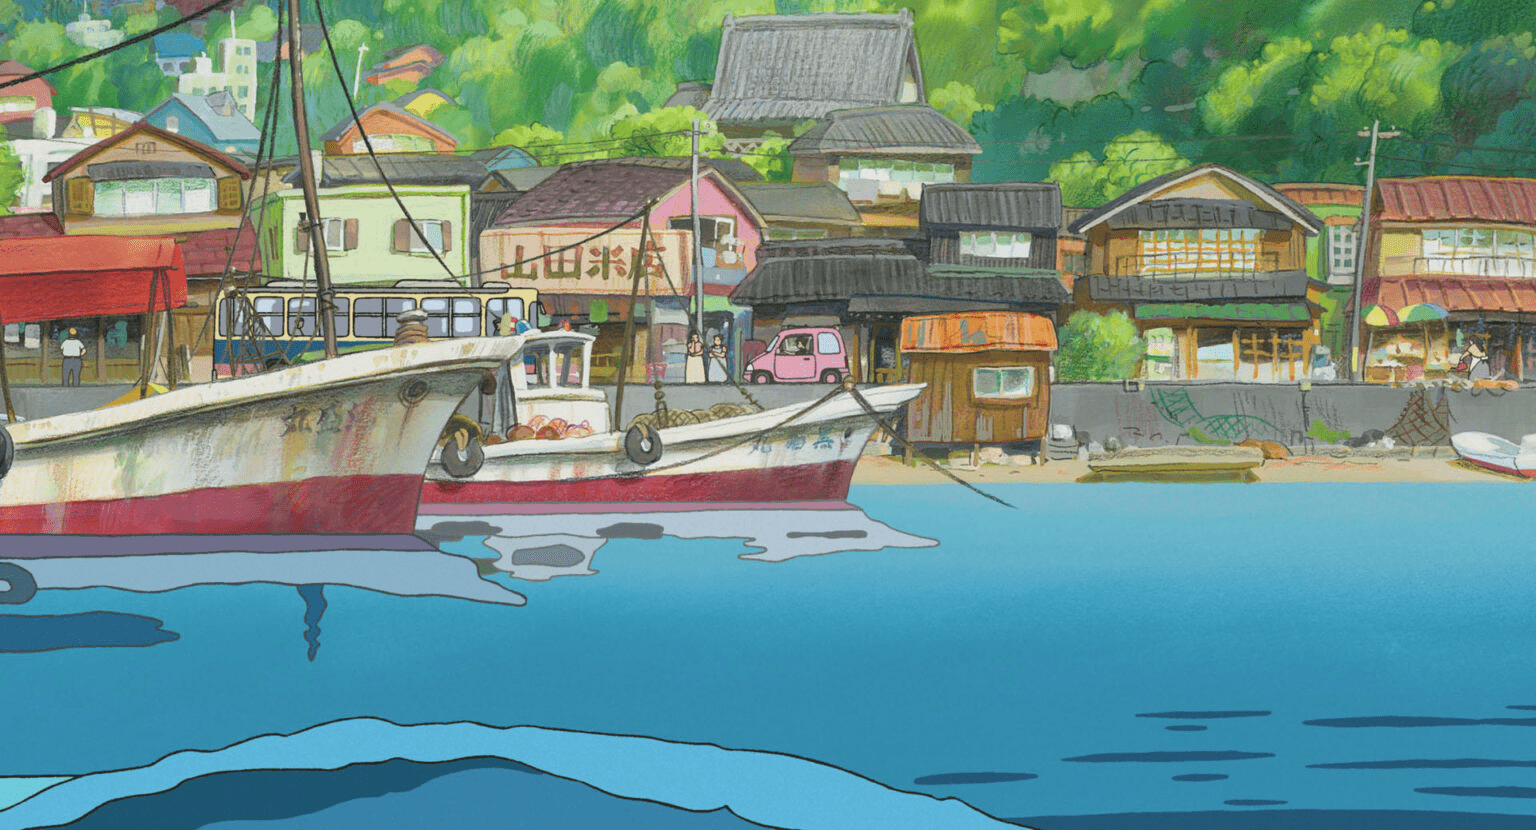 Anime-Like Places In Japan - Ponyo On The Cliff by The Sea